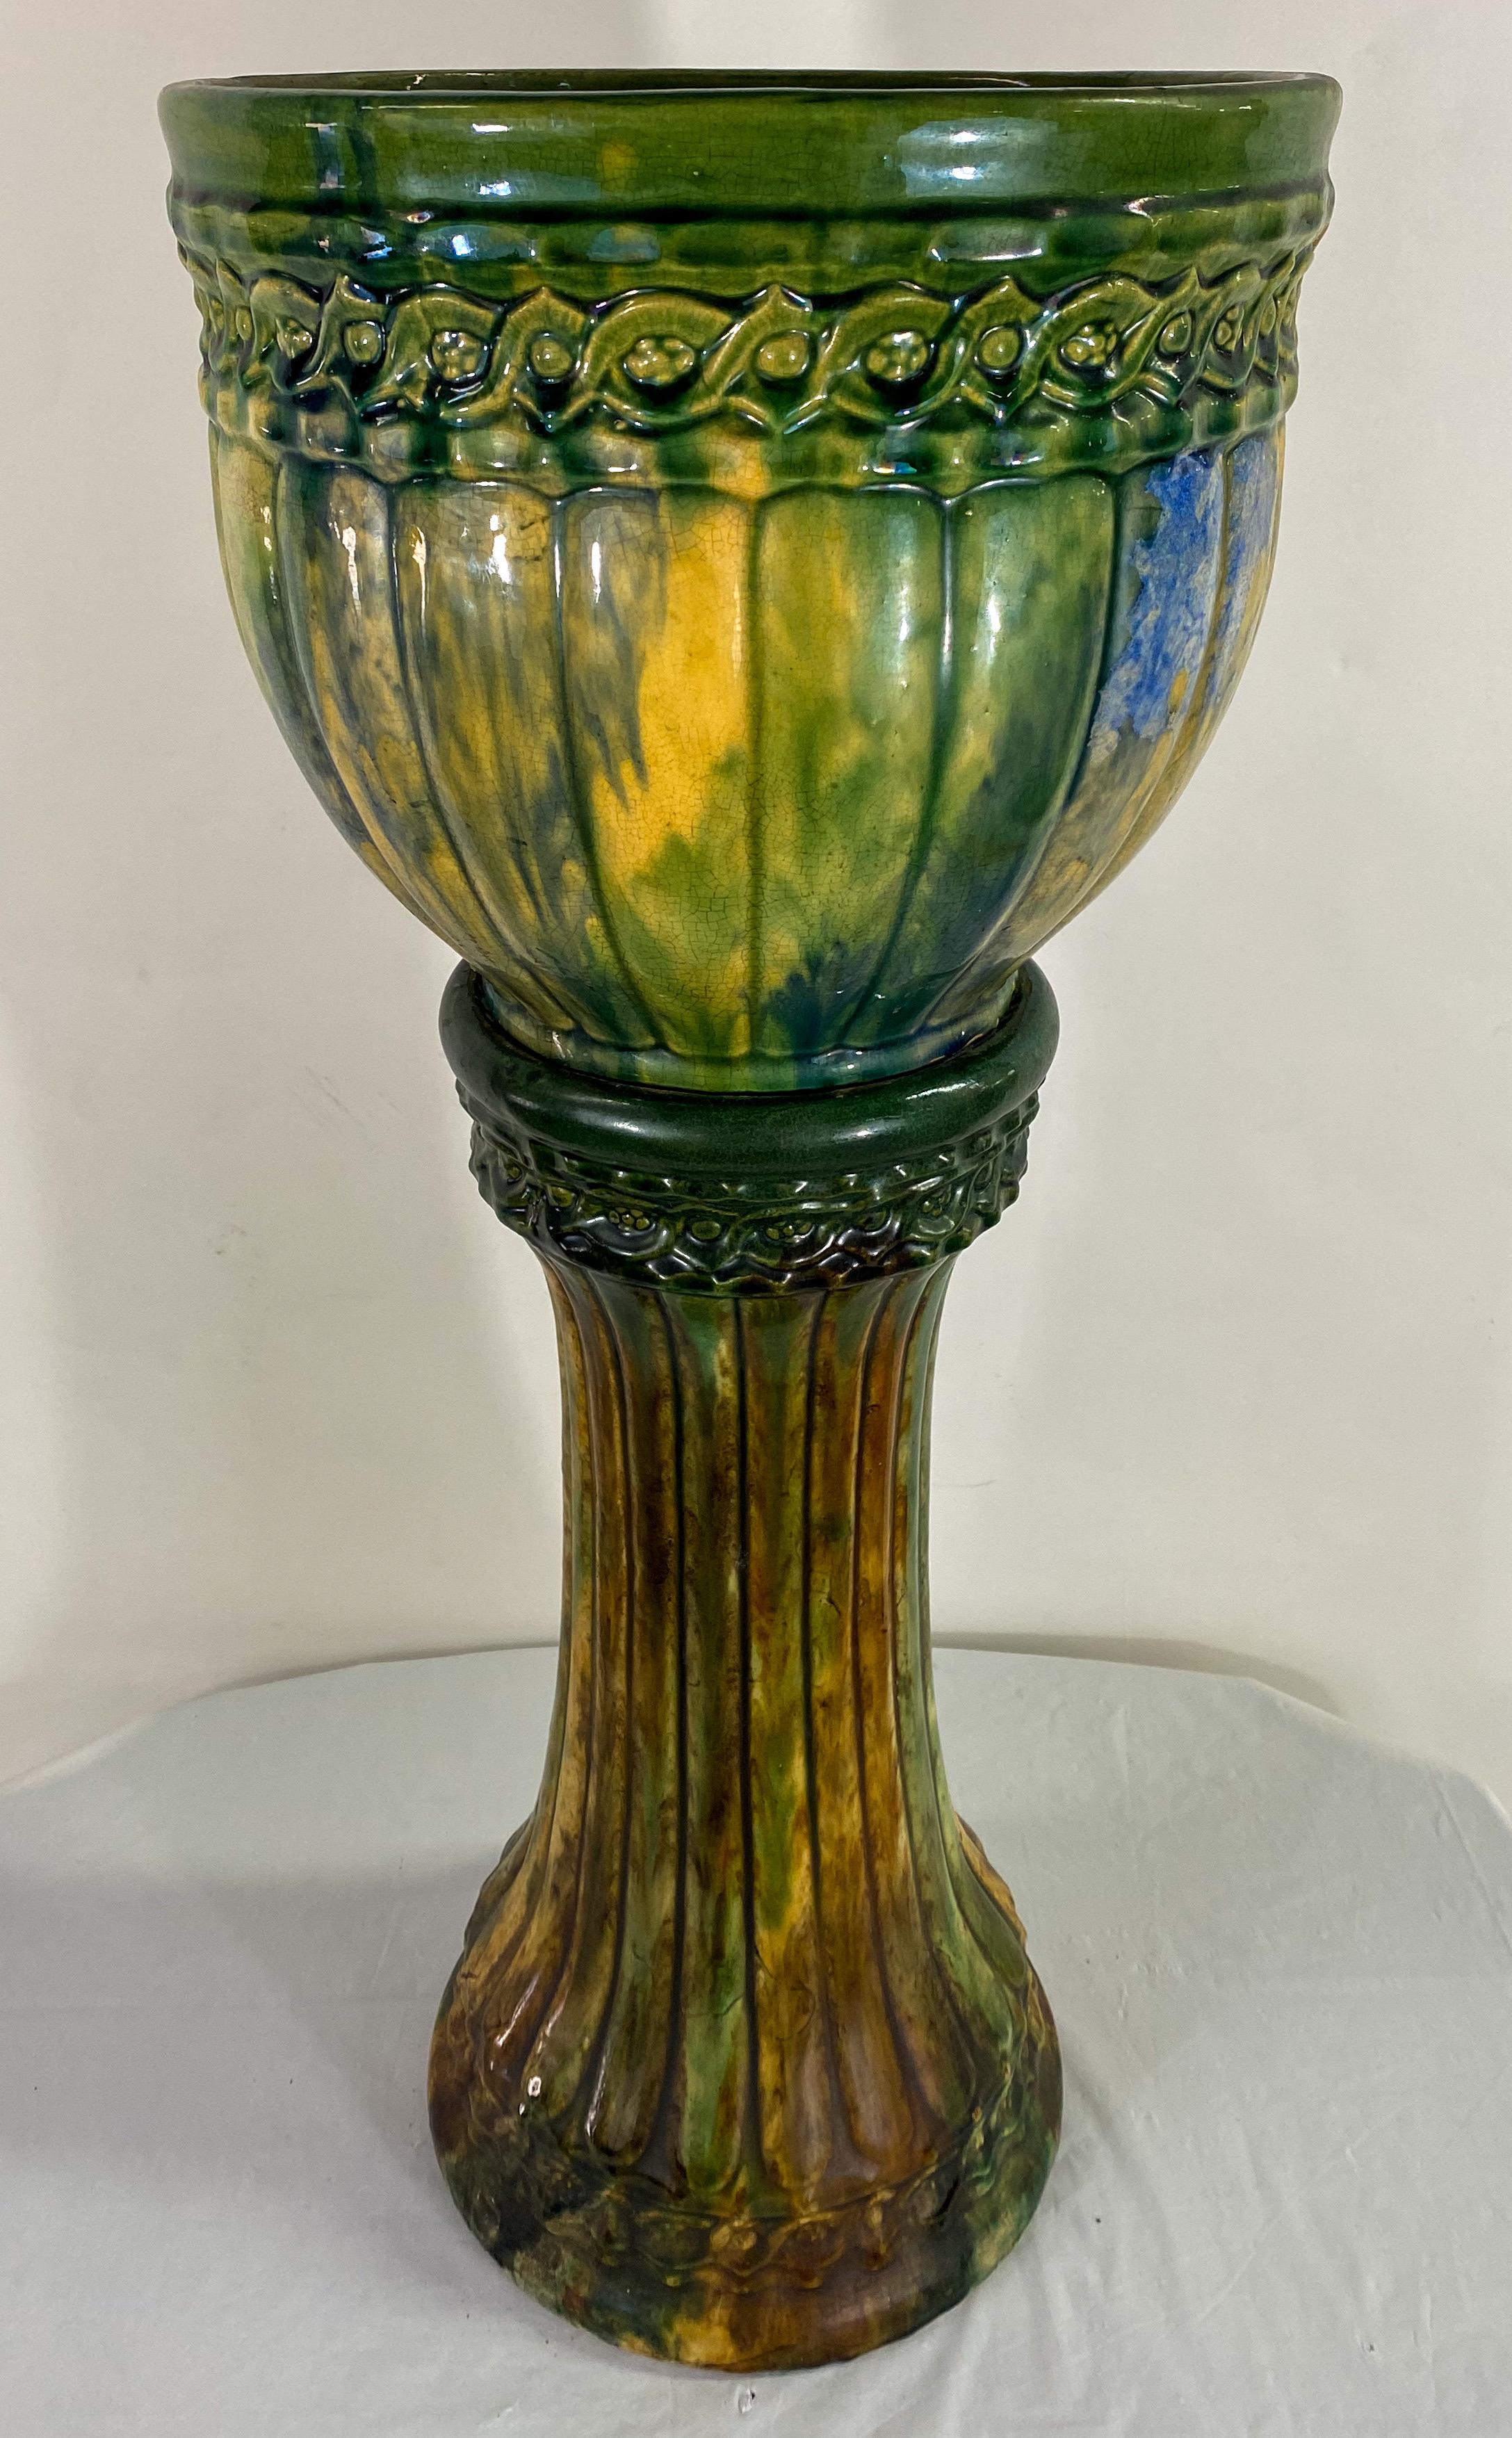 A beautiful Art Nouveau ceramic Majolica planter or jardiniere. The planter is standing on a beautiful pedestal both having exquisite ribbed squash design and featuring a vibrant green color with shades of yellow. 
The two-part jardiniere is